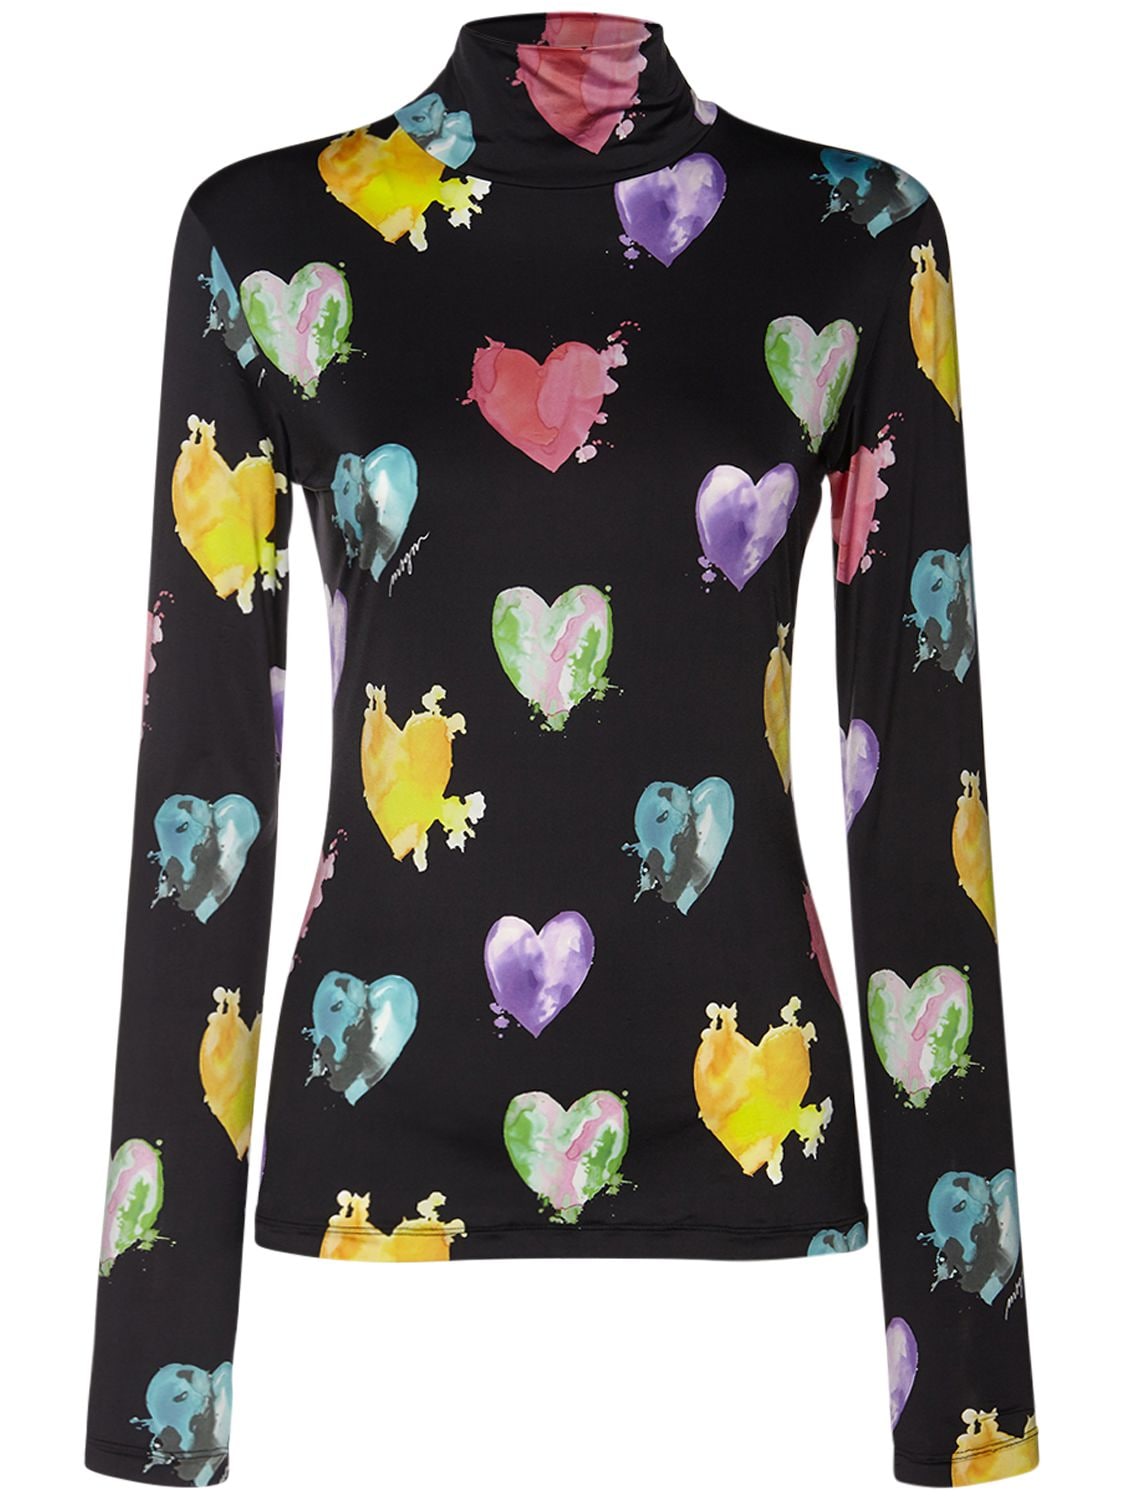 Dripping Hearts Printed Top